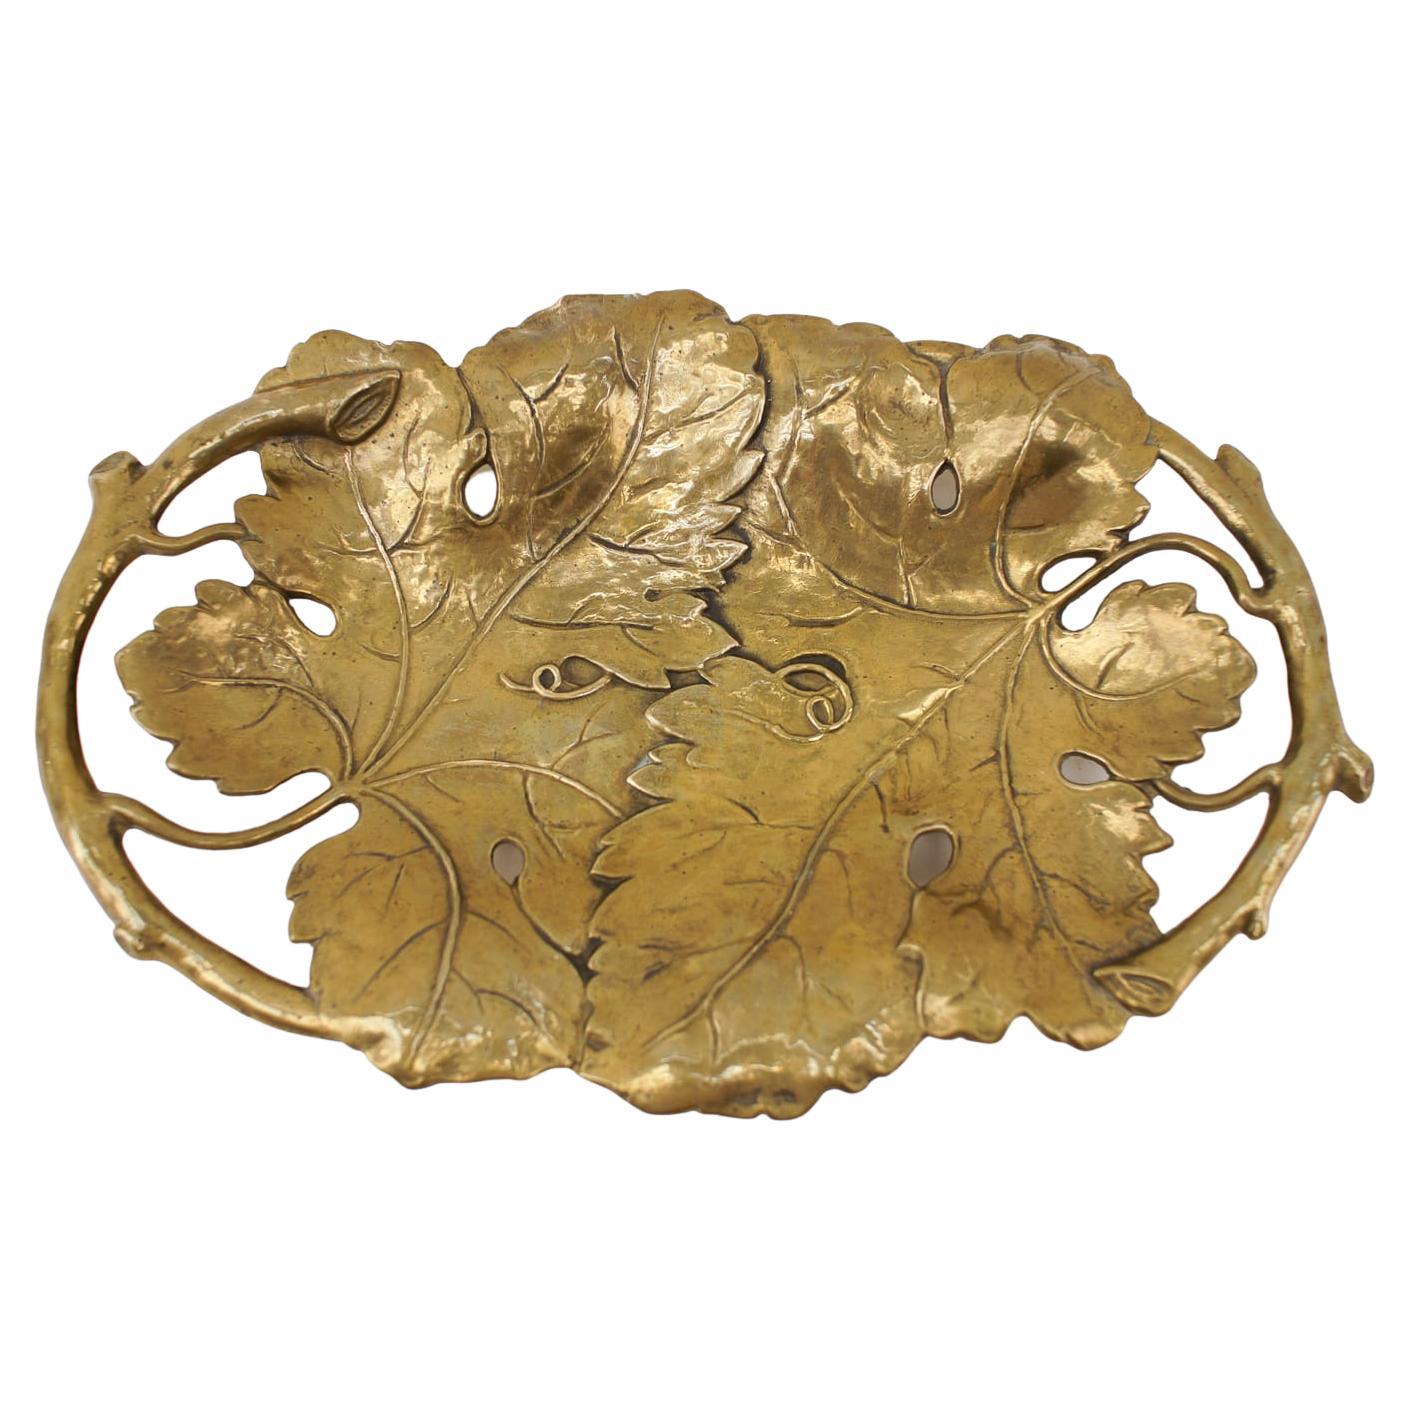 Two Vine Leaves Hand Formed into a Solid Brass Bowl, 1960s